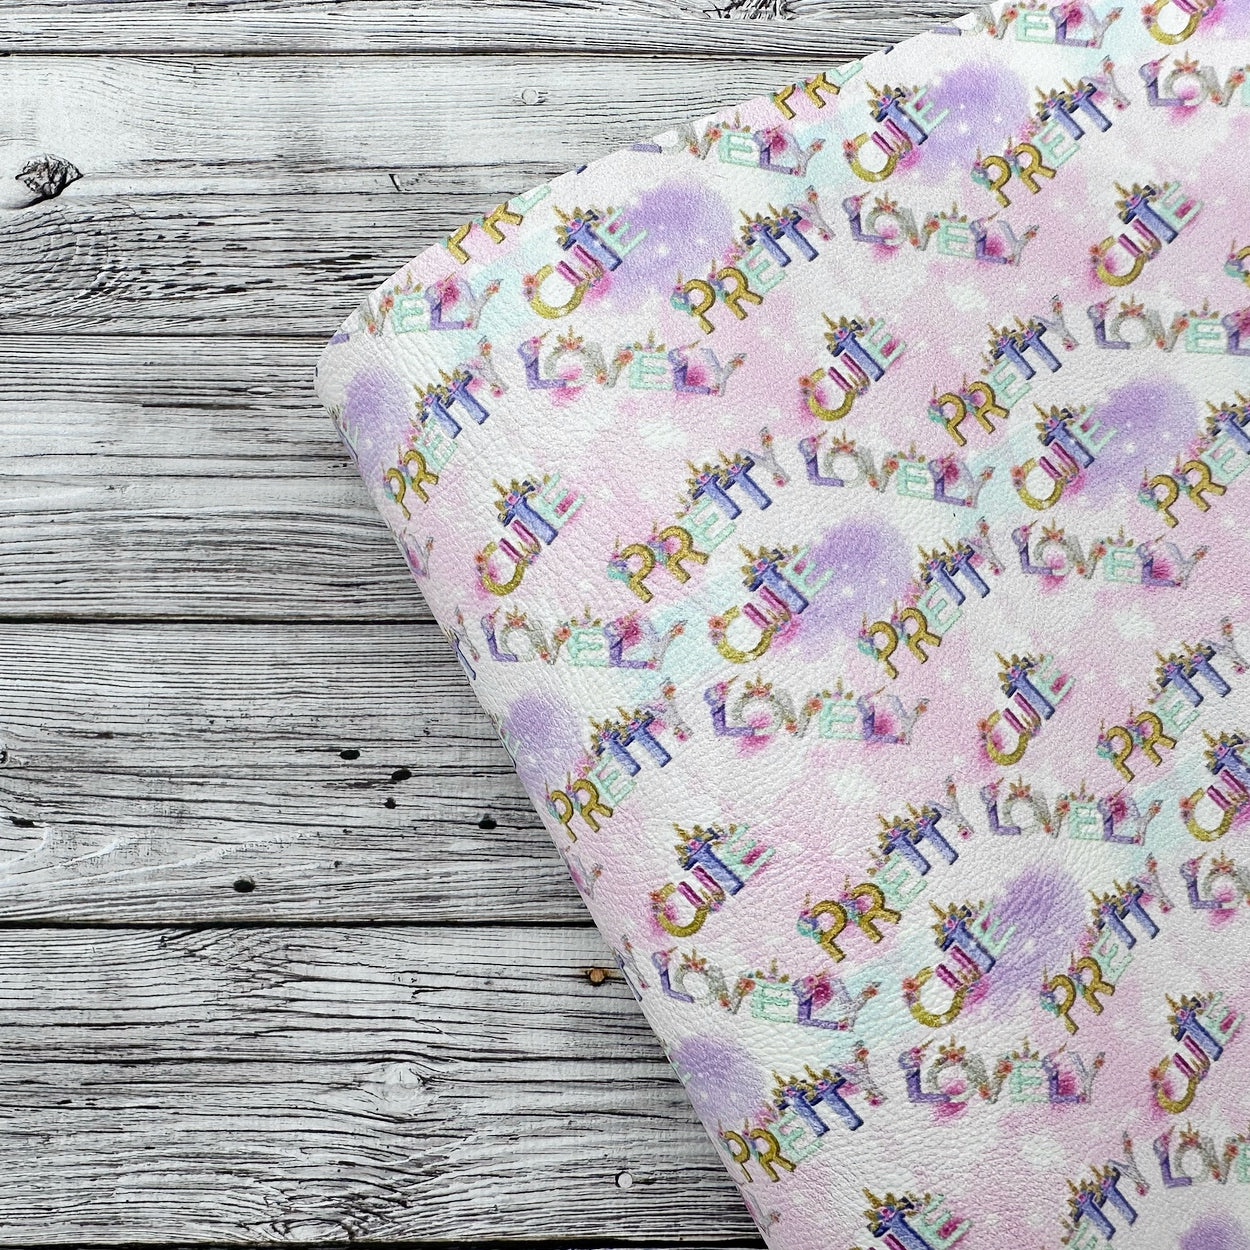 Pretty, Cute, Lovely Unicorns Premium Faux Leather Fabric Sheets